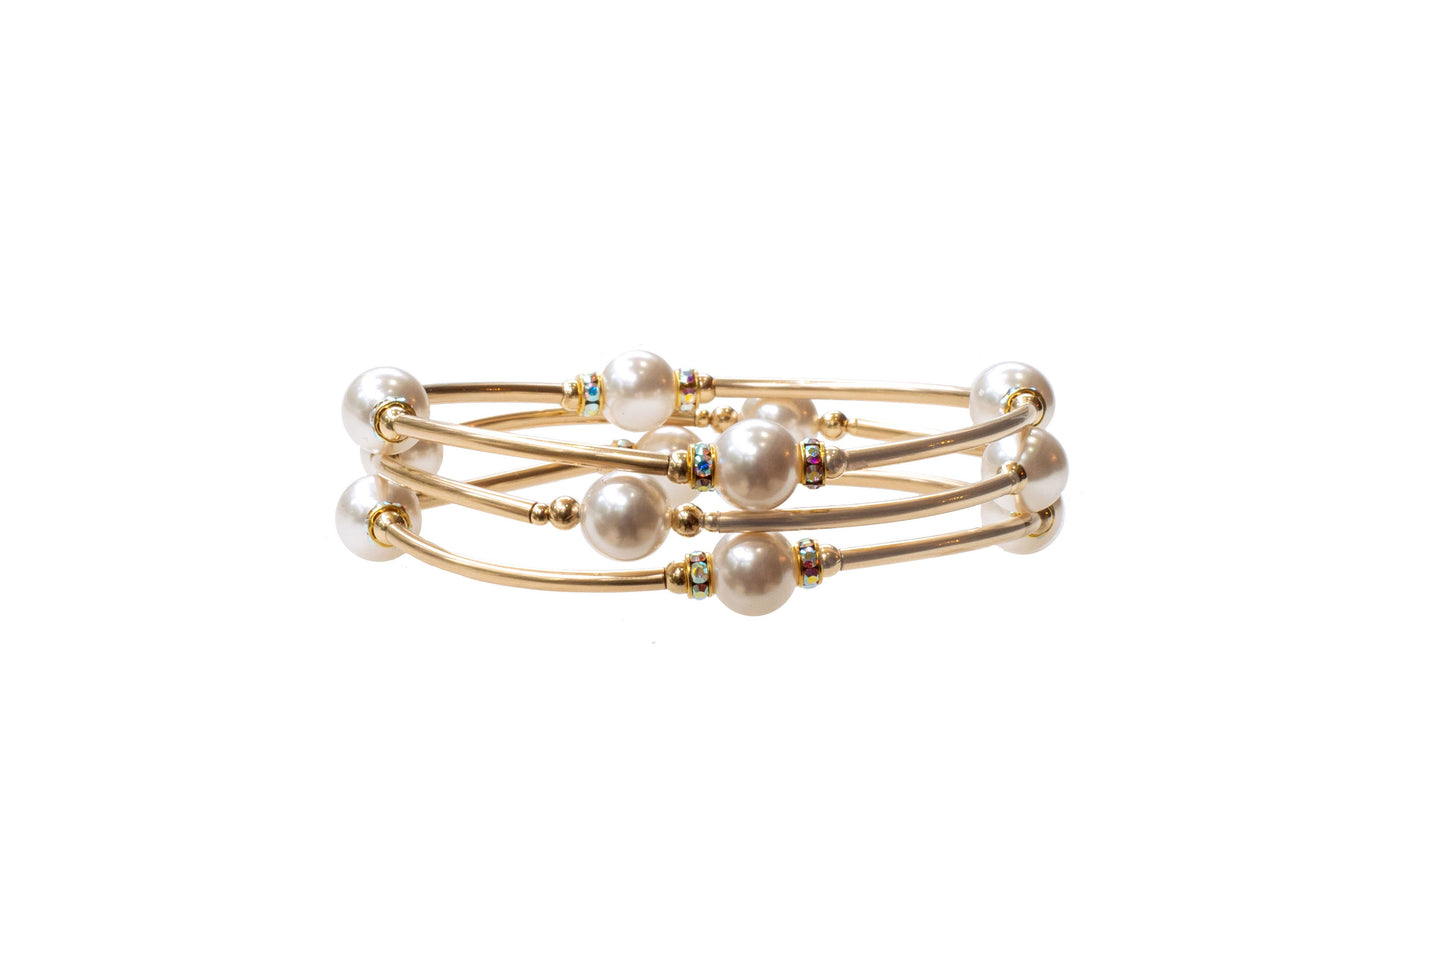 8mm Crystal White Blessing Bracelet with Gold-filled Links: S